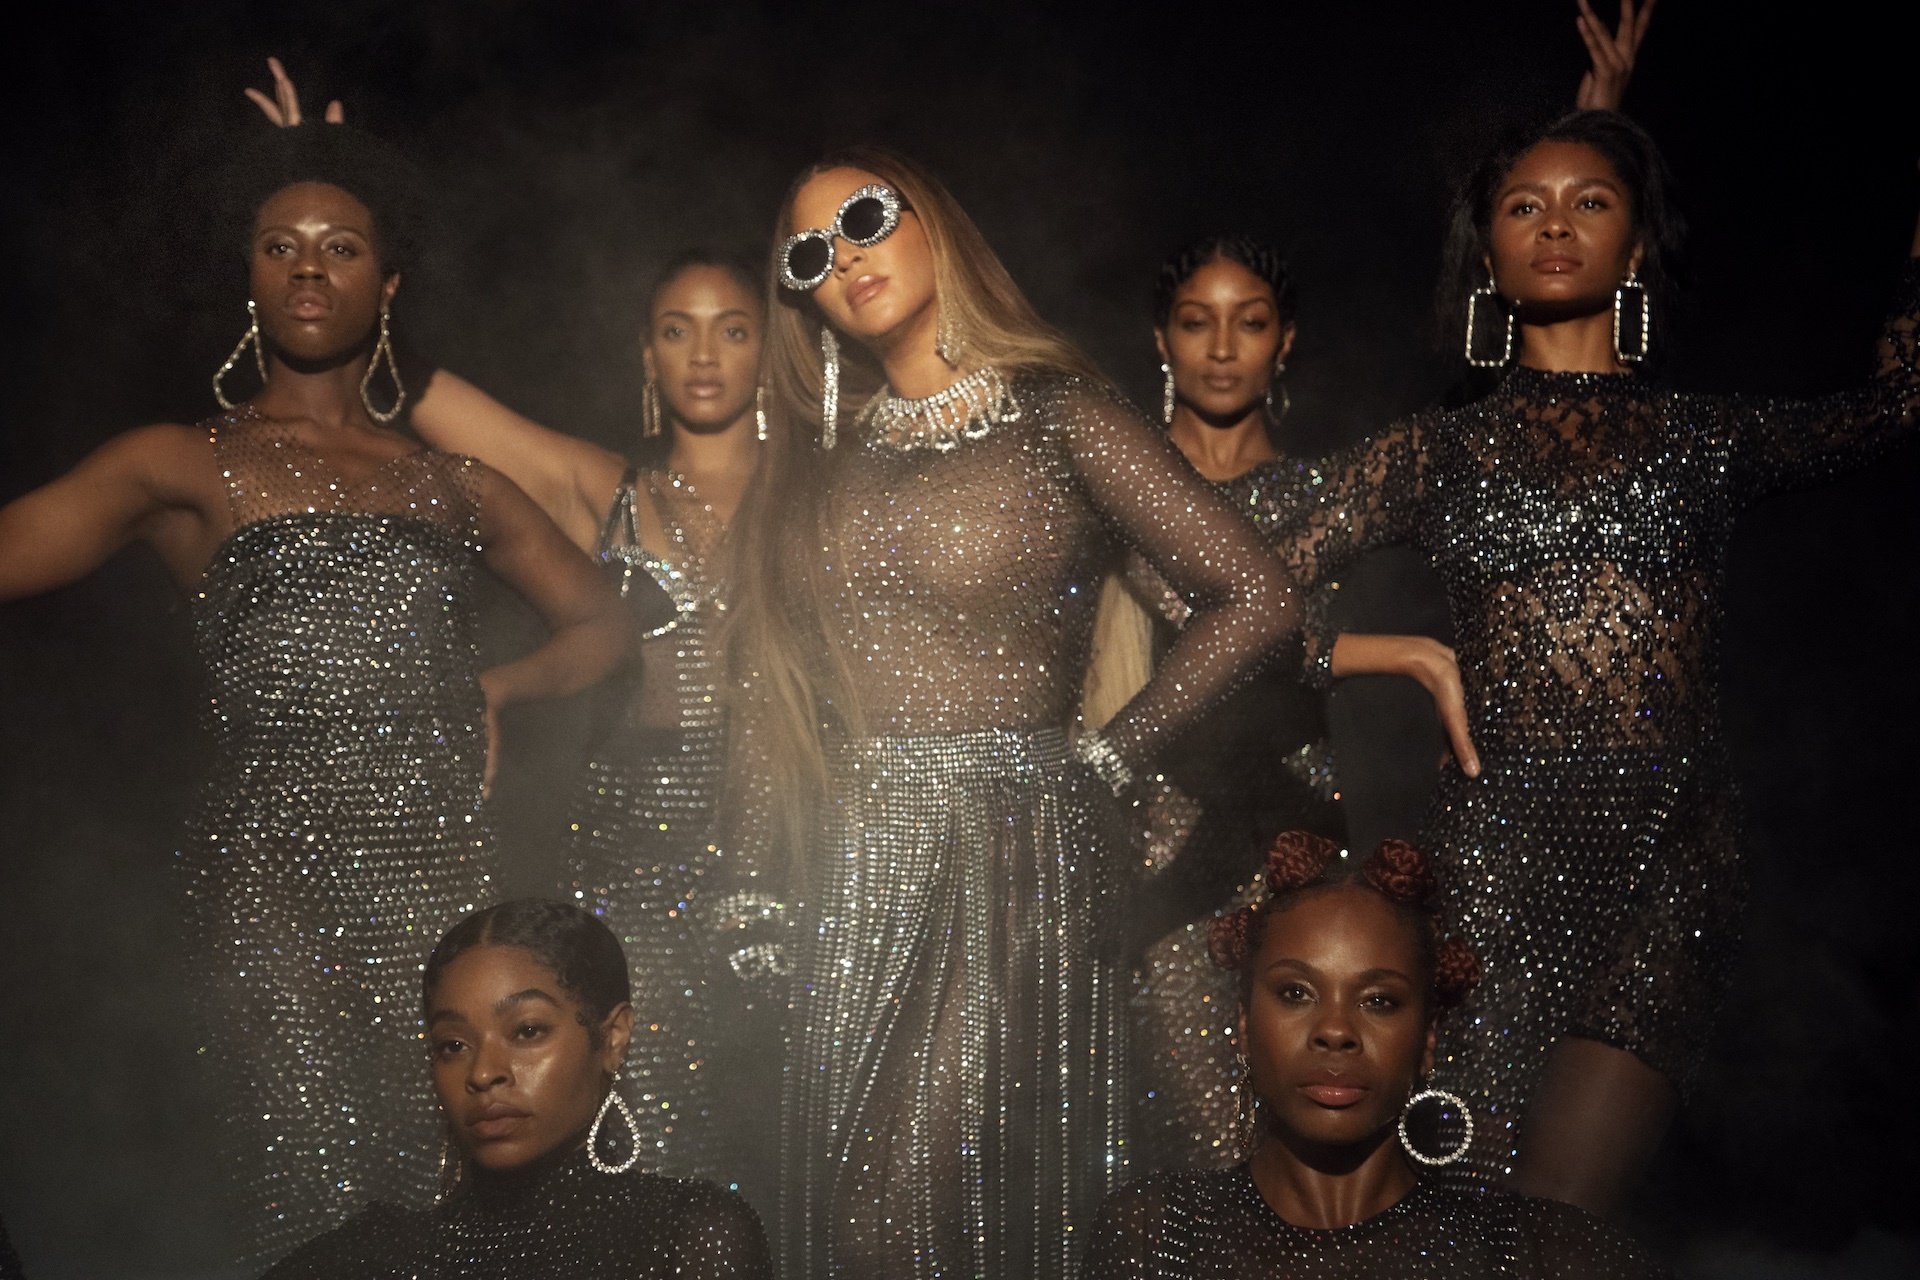 A group of Black women in sequined gowns standing behind Beyoncé.